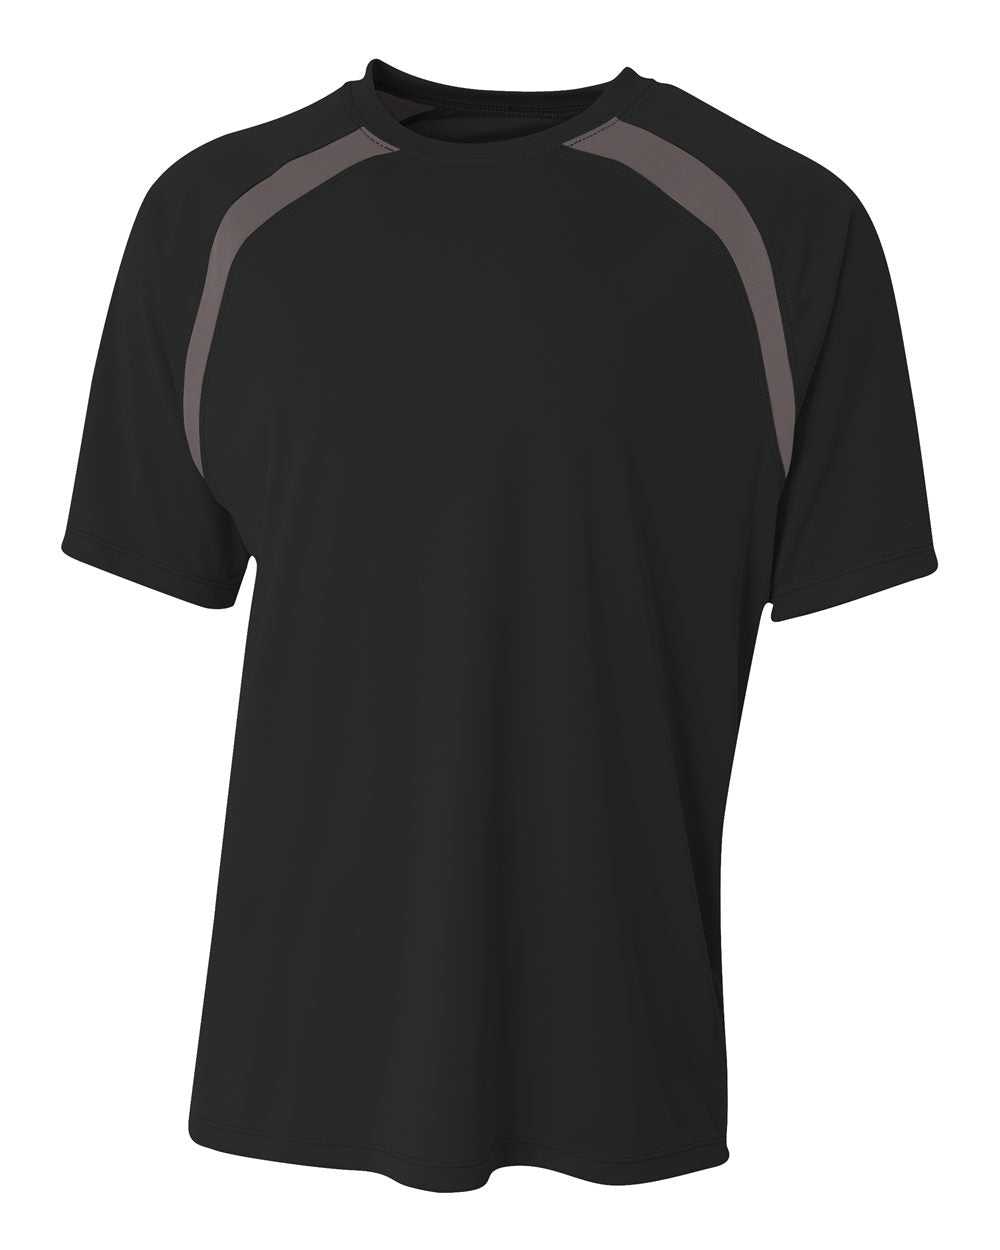 A4 NB3001 Youth Spartan Short Sleeve Color Block Crew - Black Graphite - HIT a Double